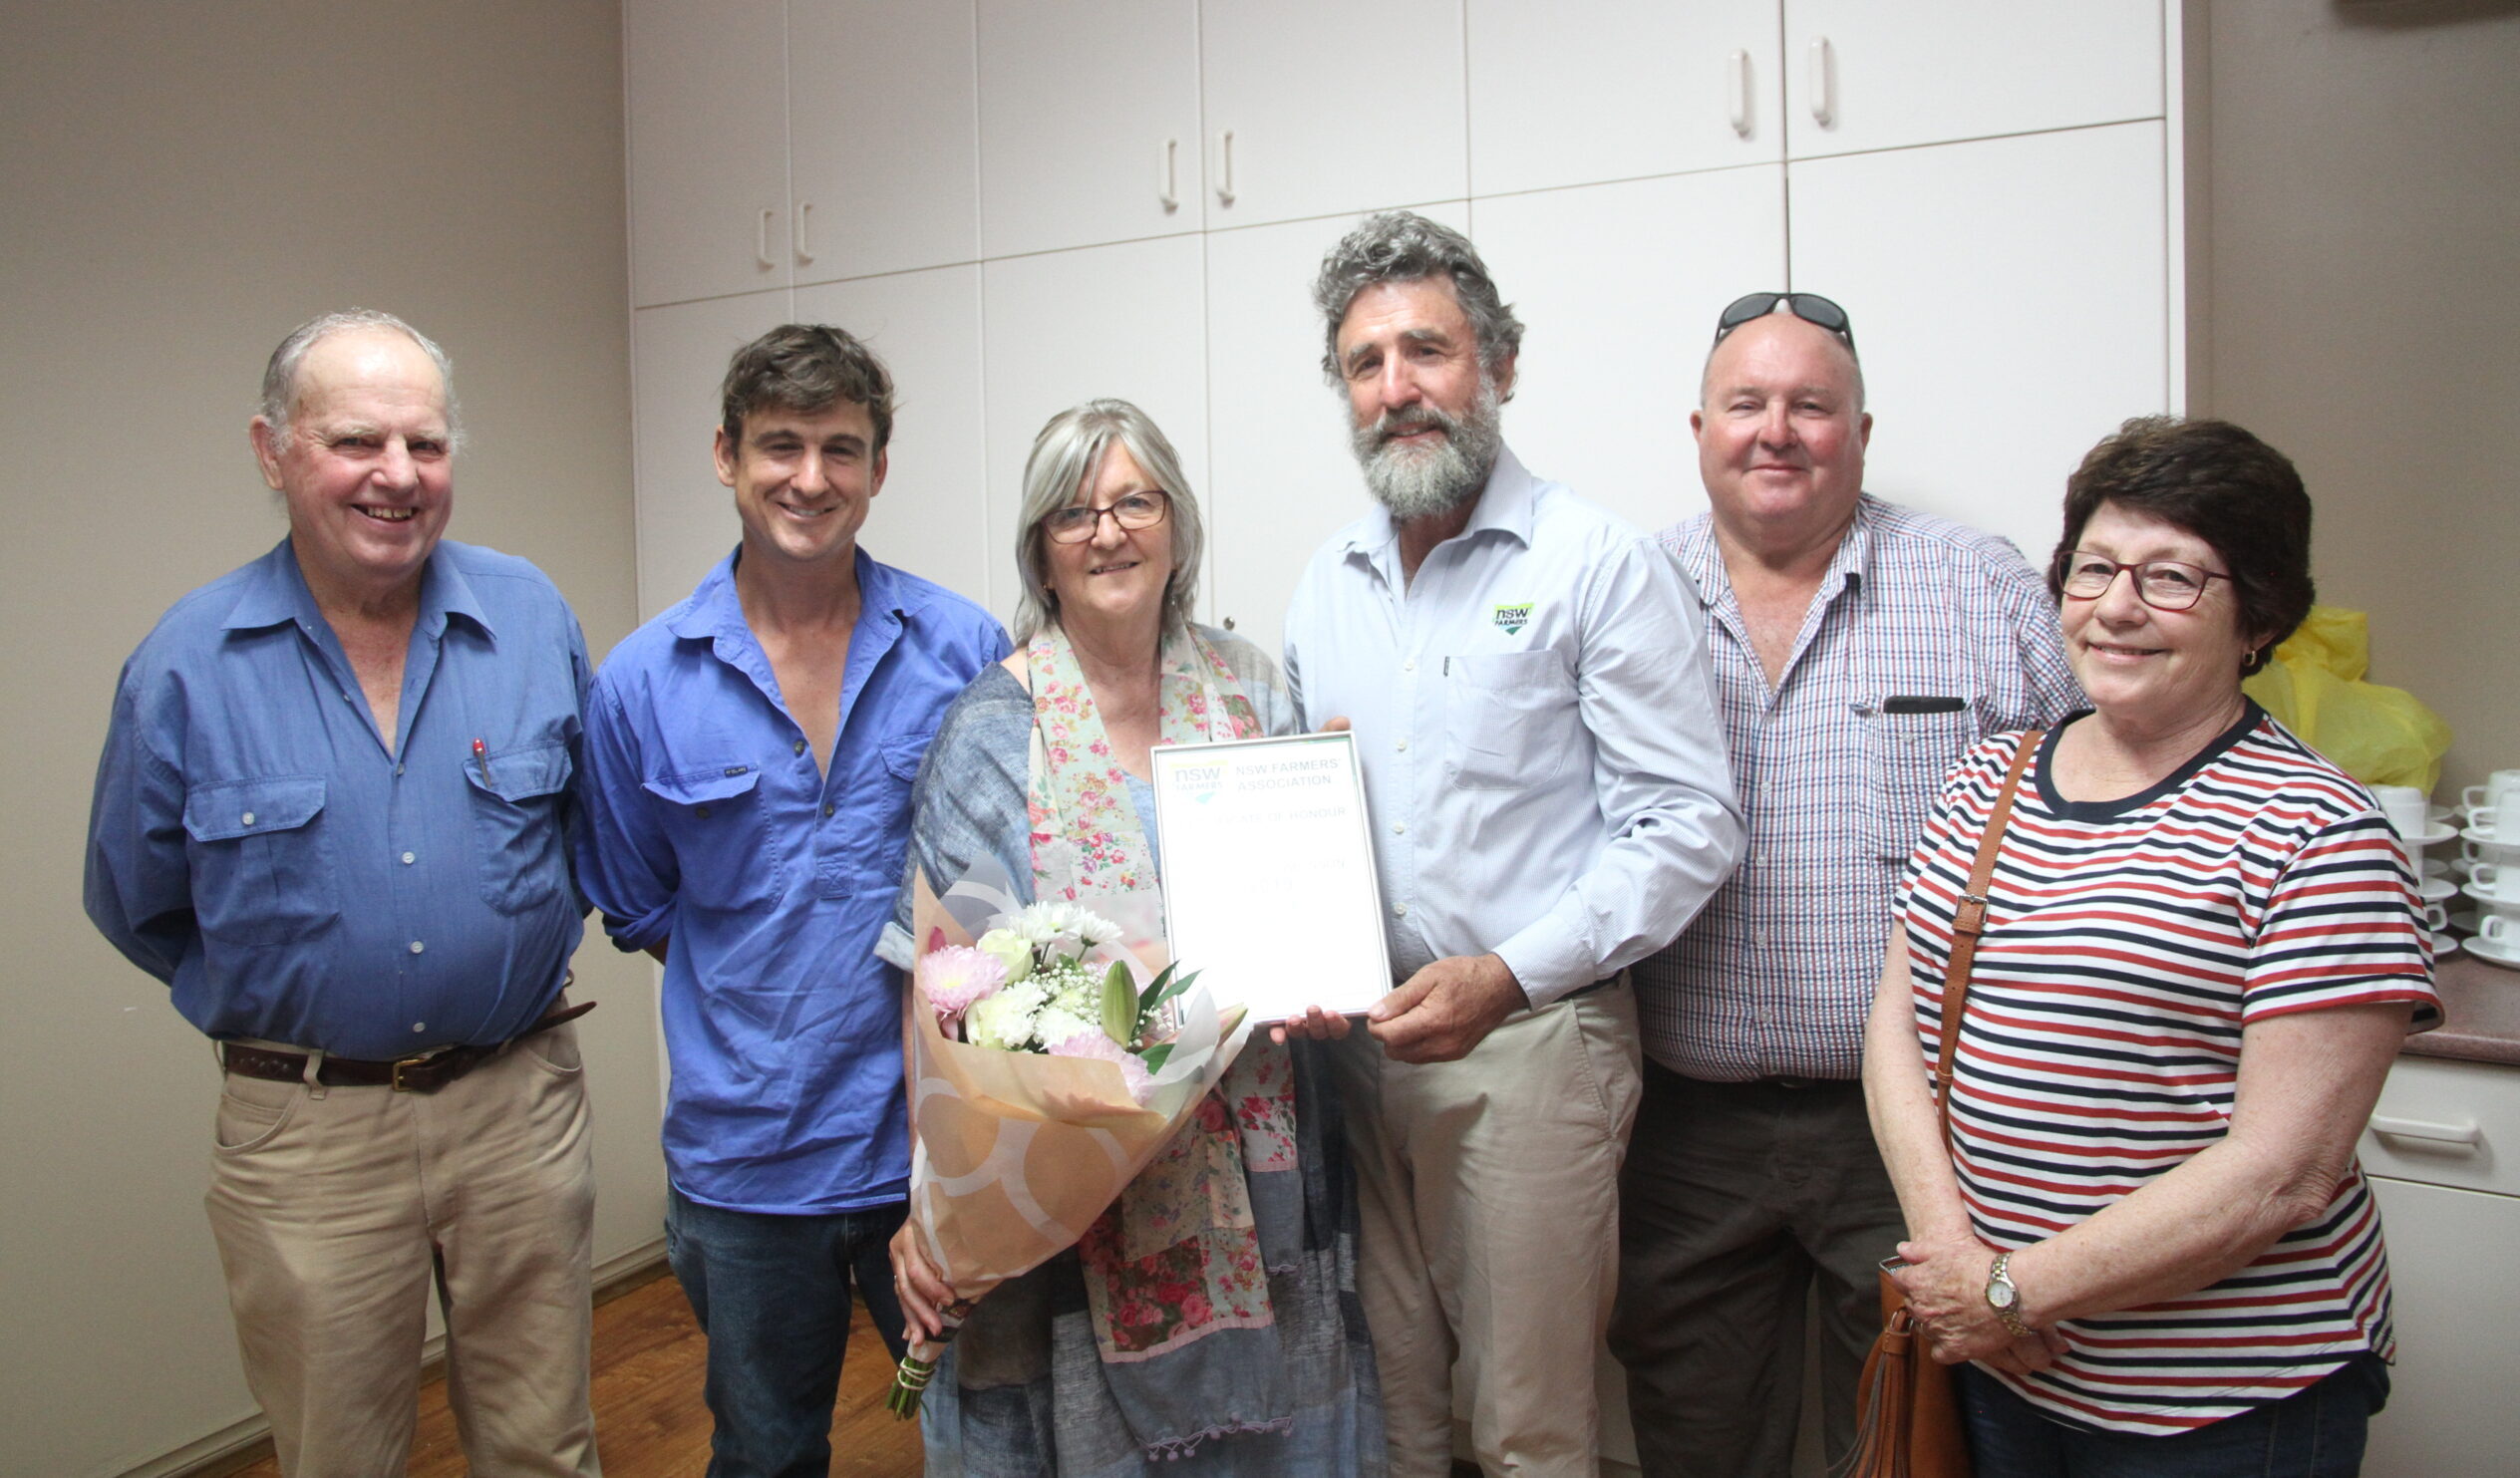 Liz Tomlinson acknowledged for contribution to farmers